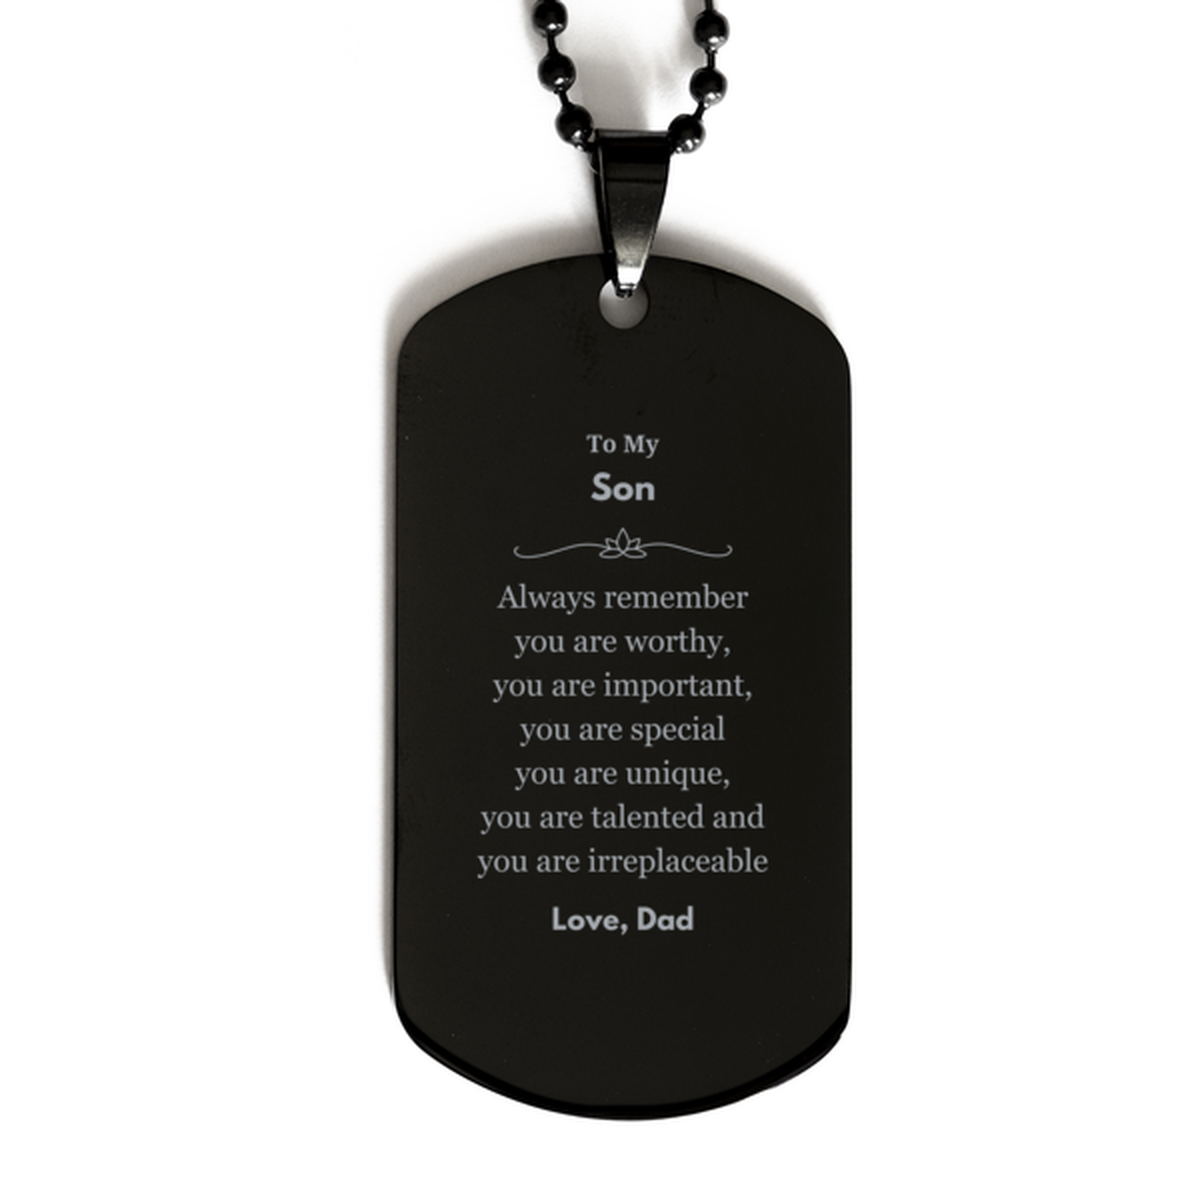 Son Birthday Gifts from Dad, Inspirational Black Dog Tag for Son Christmas Graduation Gifts for Son Always remember you are worthy, you are important. Love, Dad